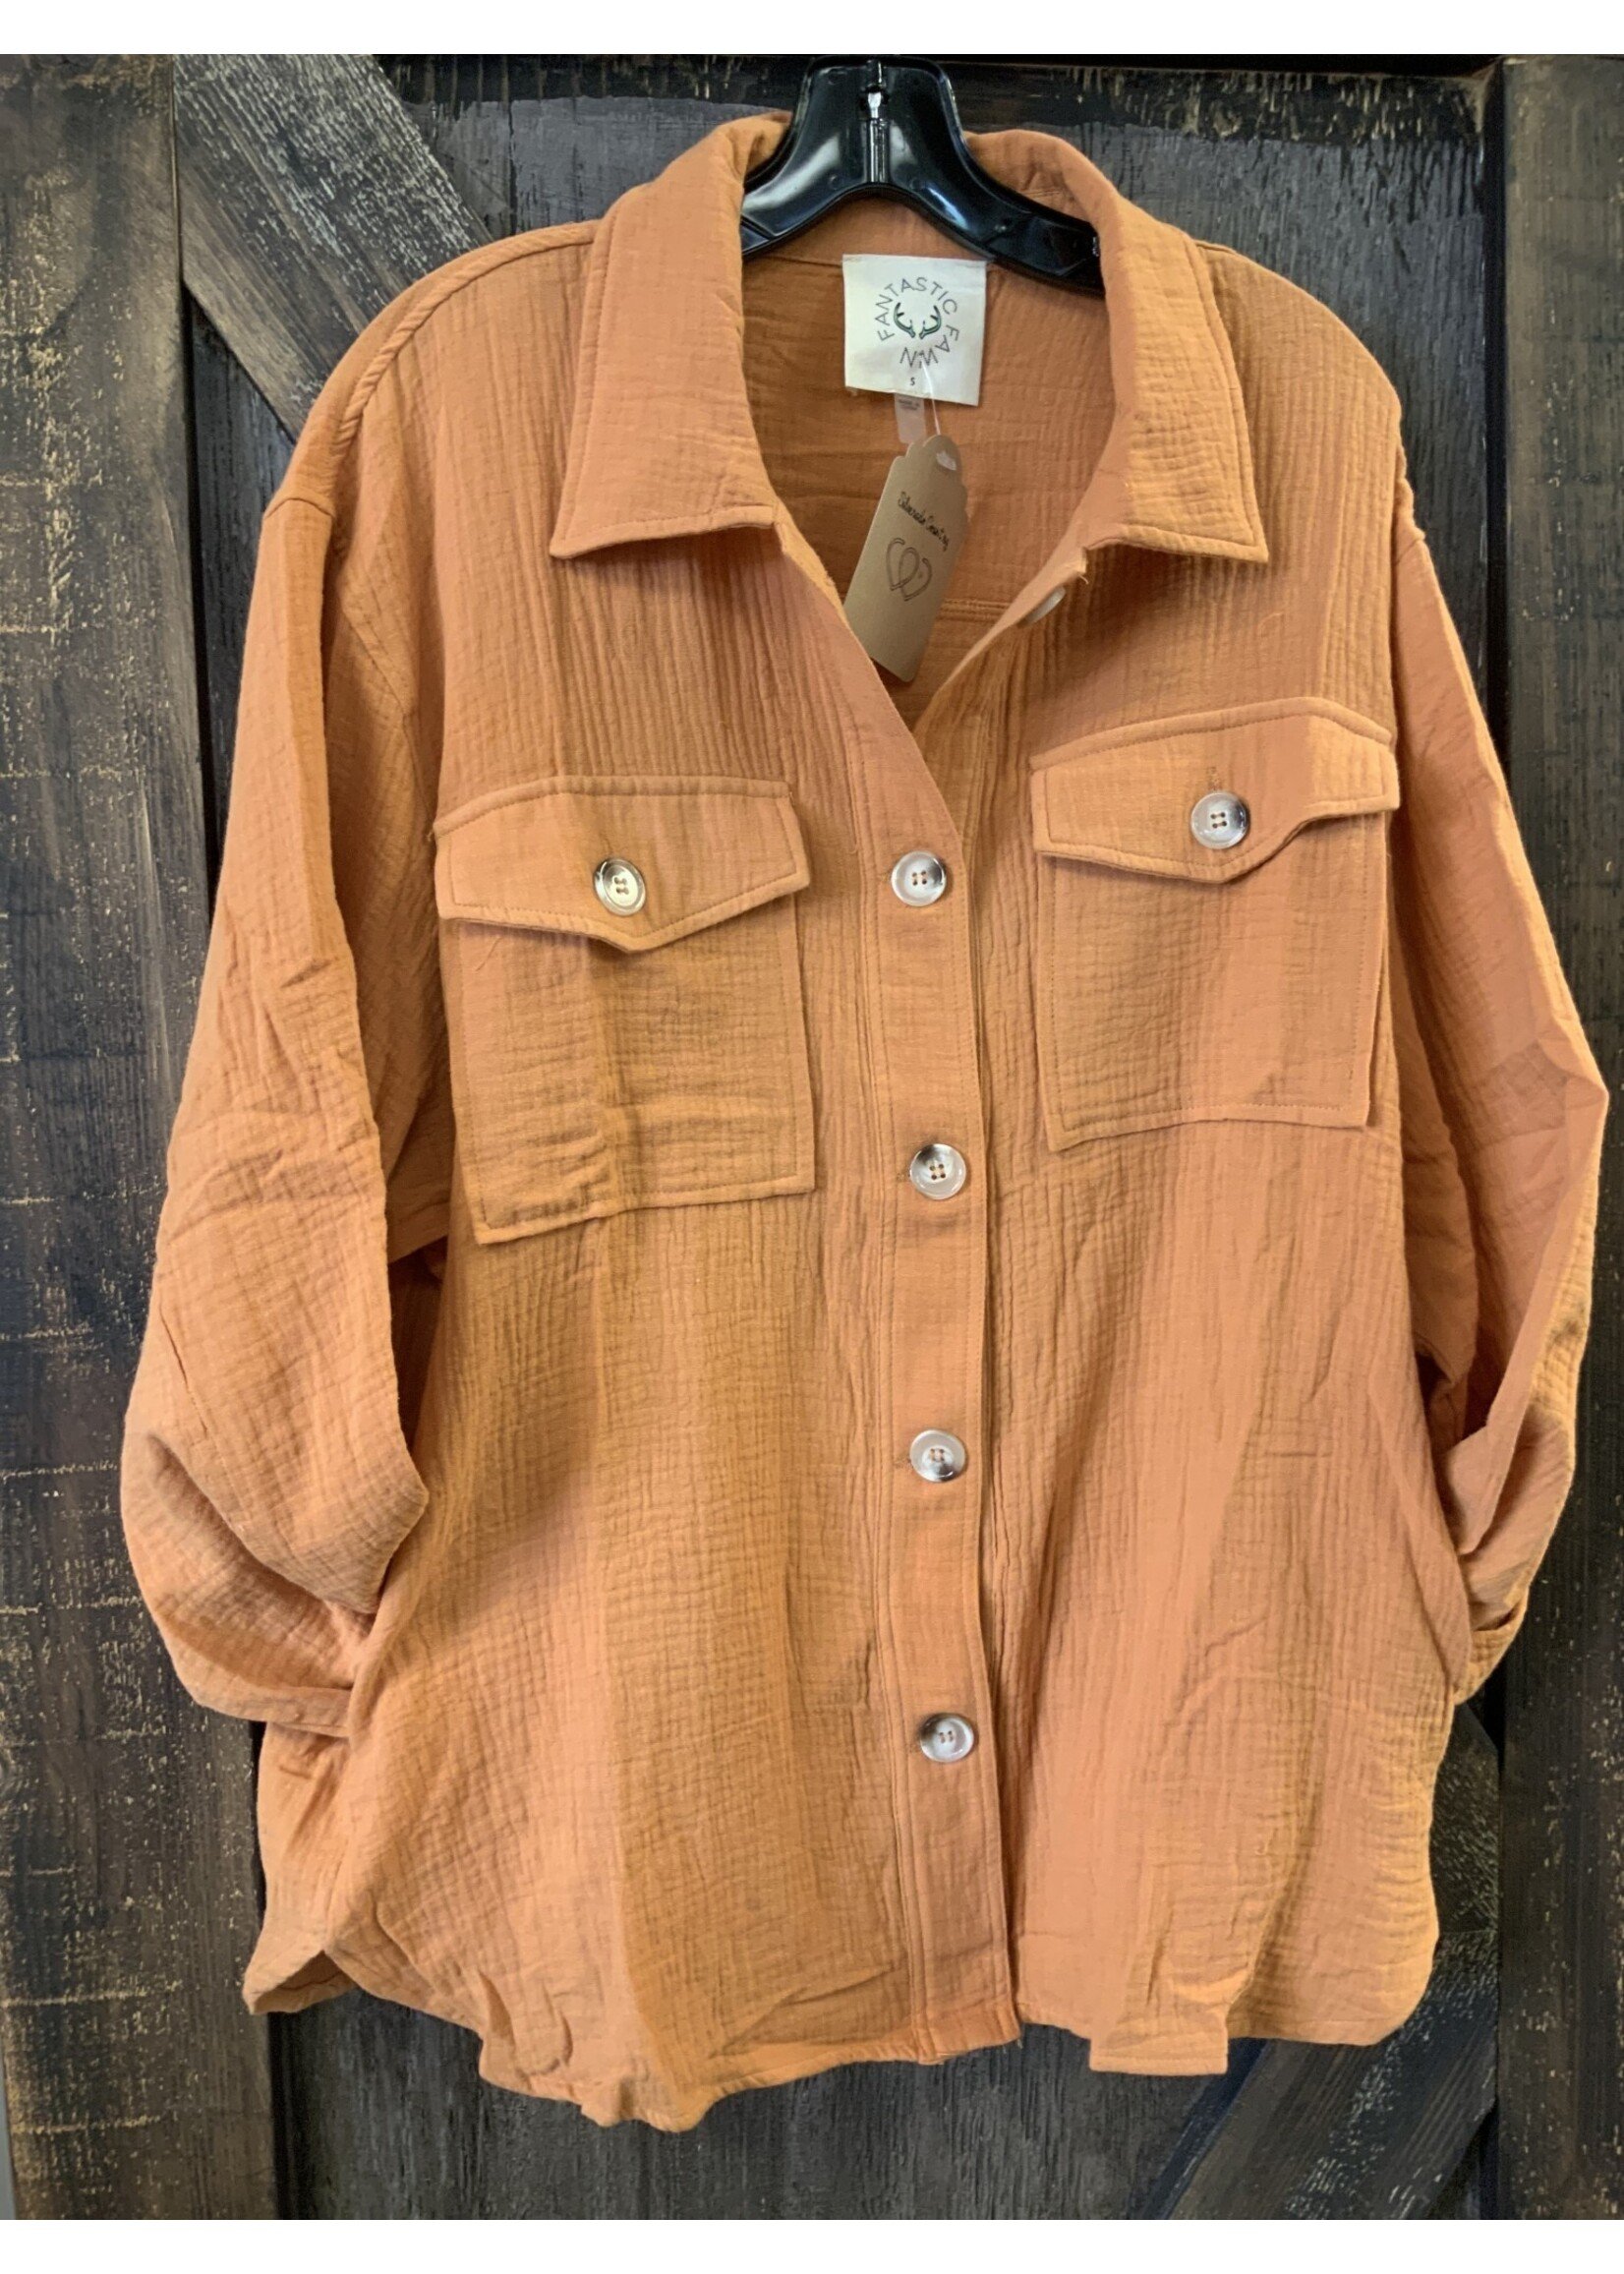 FANTASTIC FAWN WOMEN’S L/S BUTTON DOWN OVERSIZED SHIRT Med